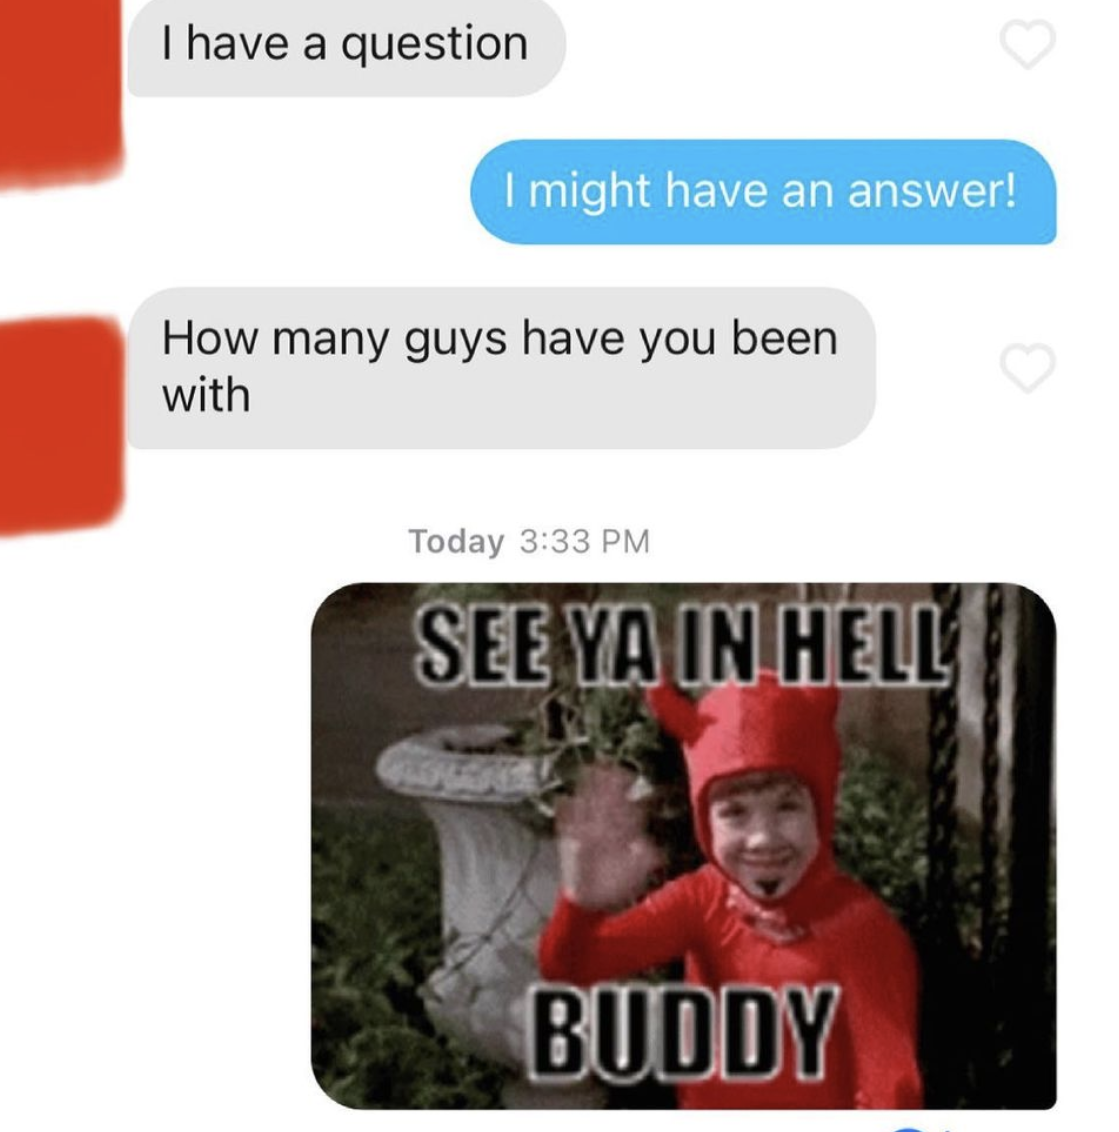 cringe tinder openers - communication - I have a question I might have an answer! How many guys have you been with Today See Ya In Hell Buddy